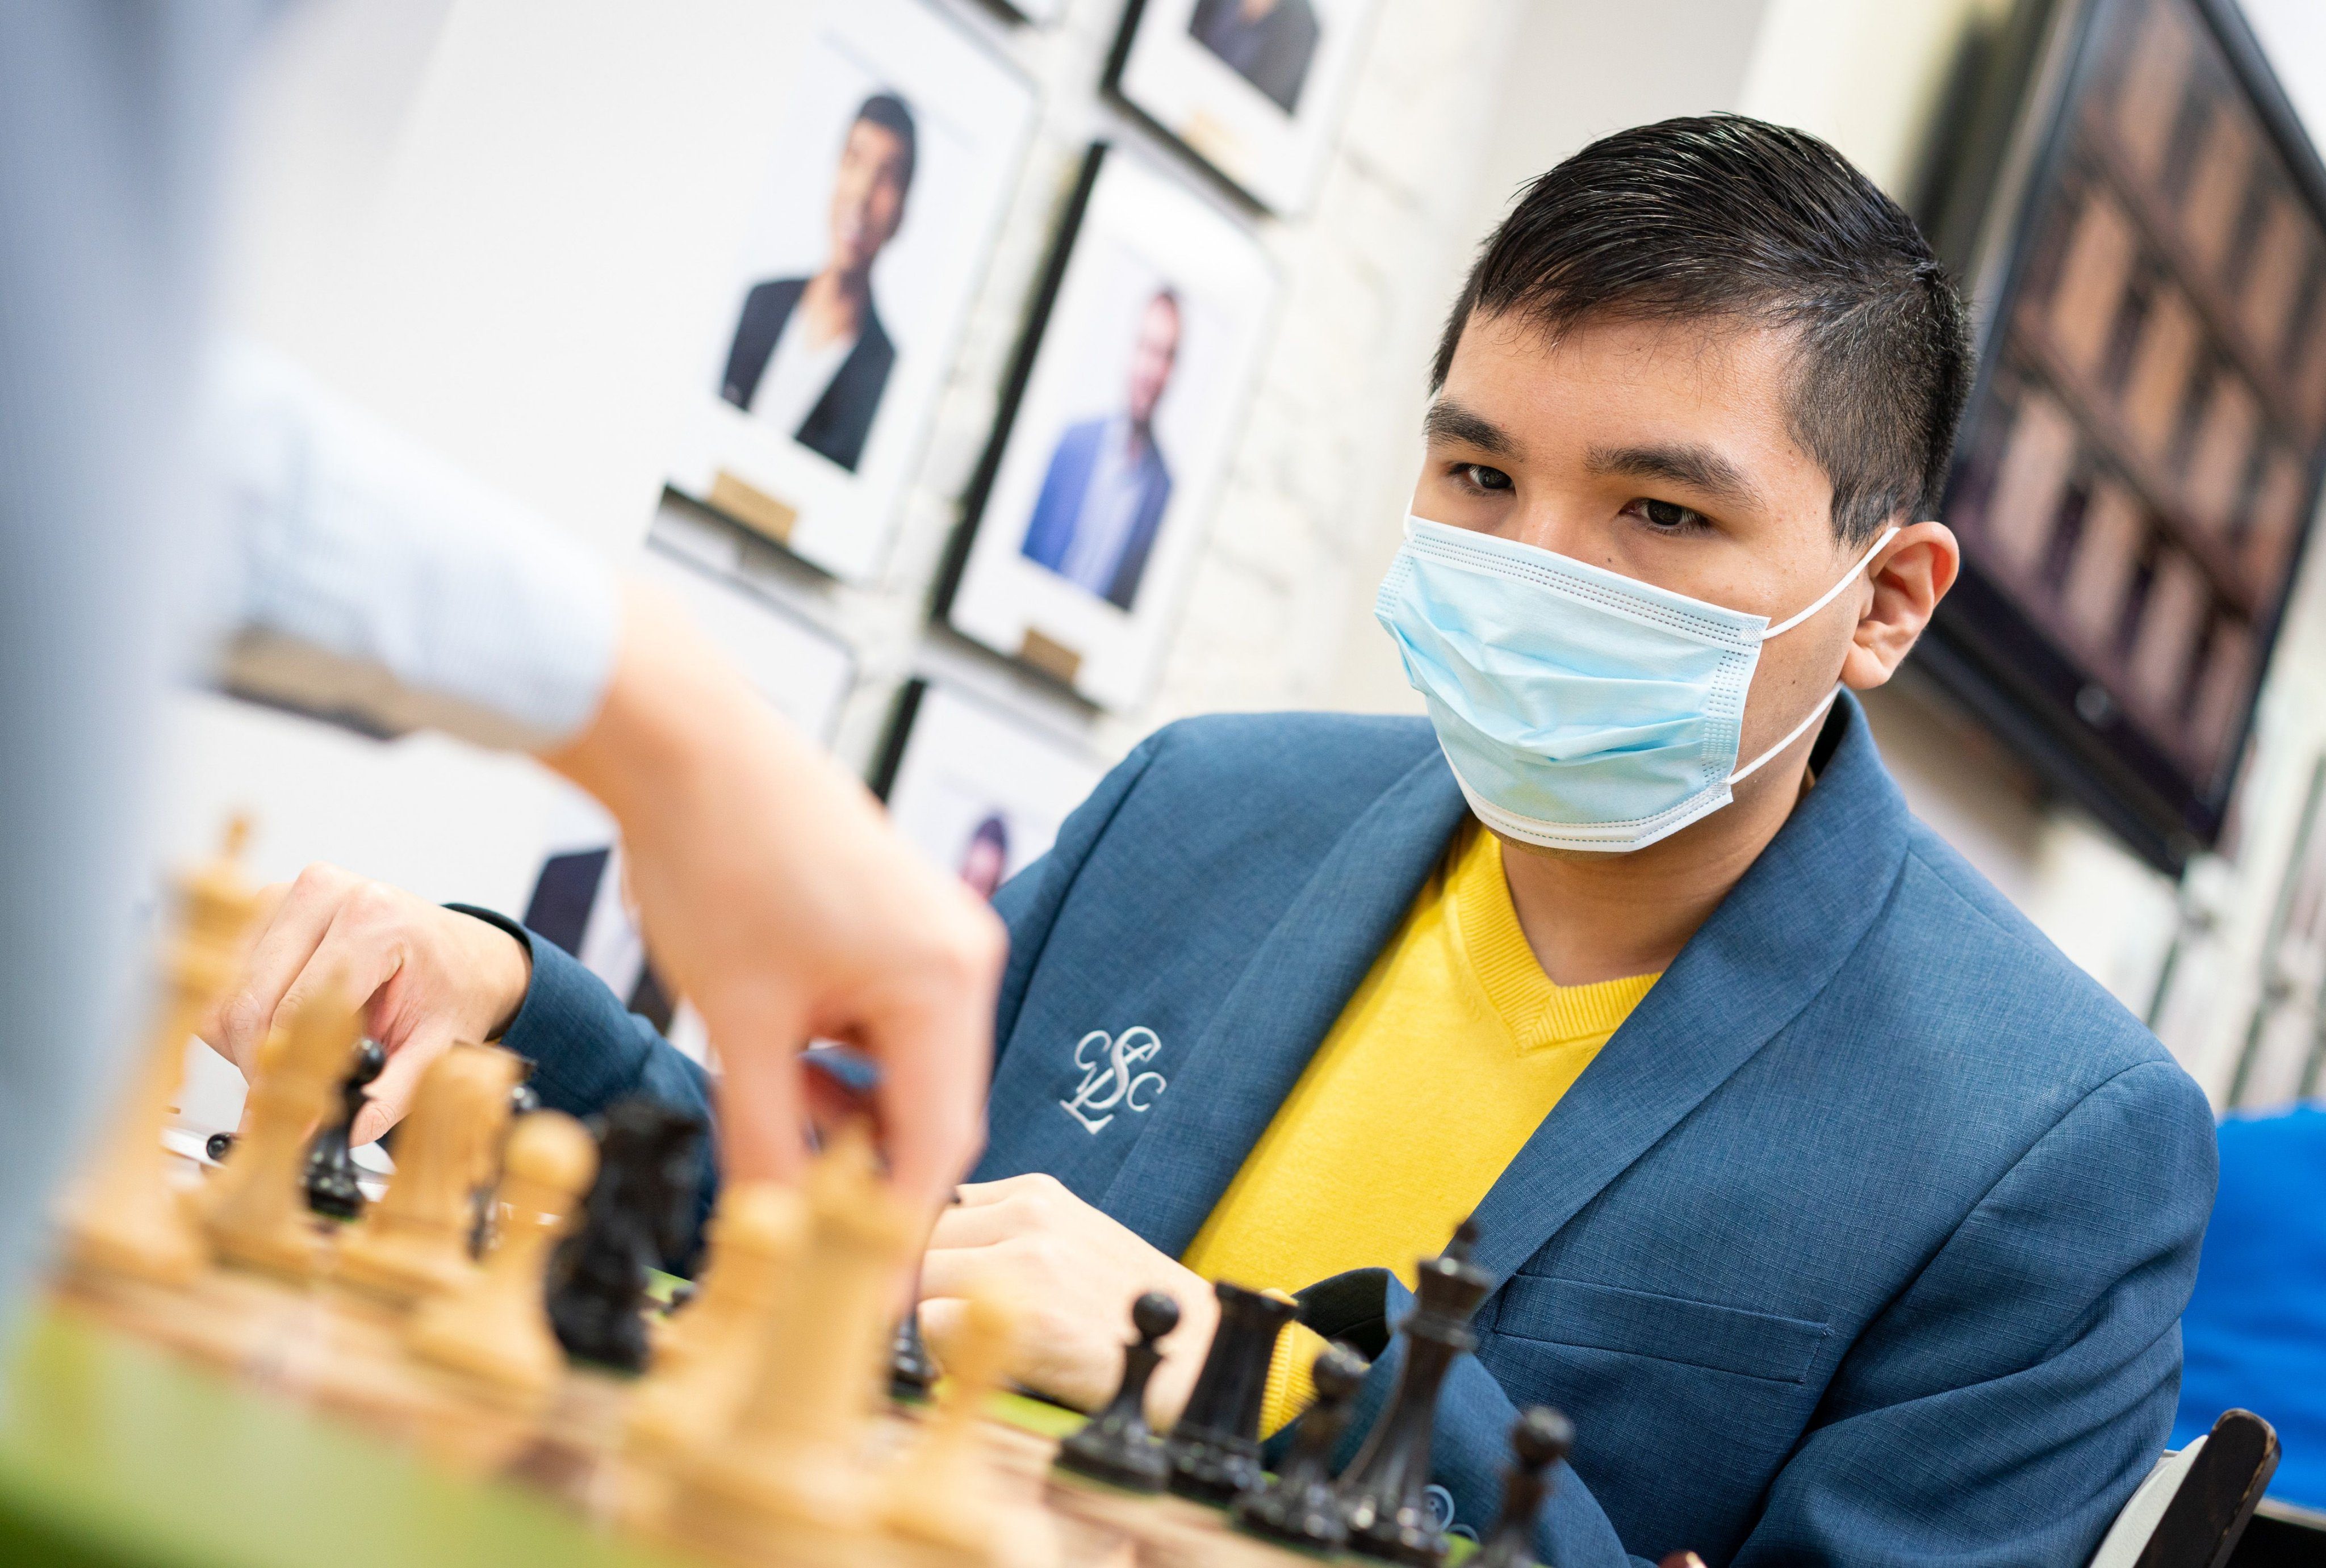 Wesley So bags over P5 million despite loss to Magnus Carlsen in CCT Finals